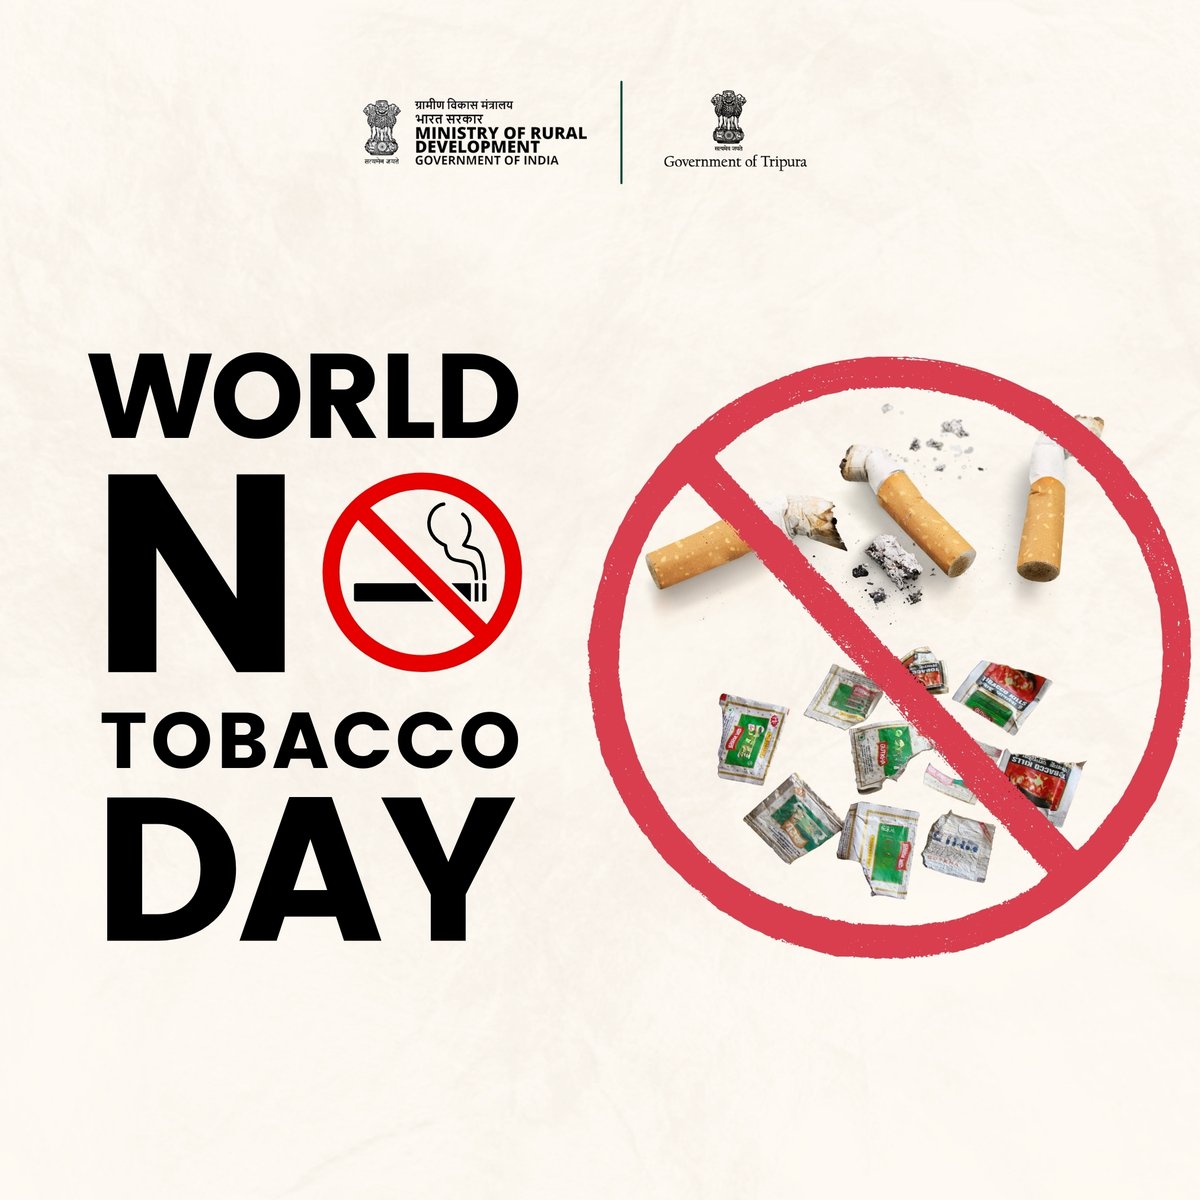 From the heart of Rural Tripura, we join the global movement for healthier living on World No Tobacco Day. Let's cultivate smoke-free communities, where clean air and well-being thrive. 🌿💨 #TobaccoFreeVillages #RuralWellness @MoJSDDWS @MoRD_GoI @mygovtripura